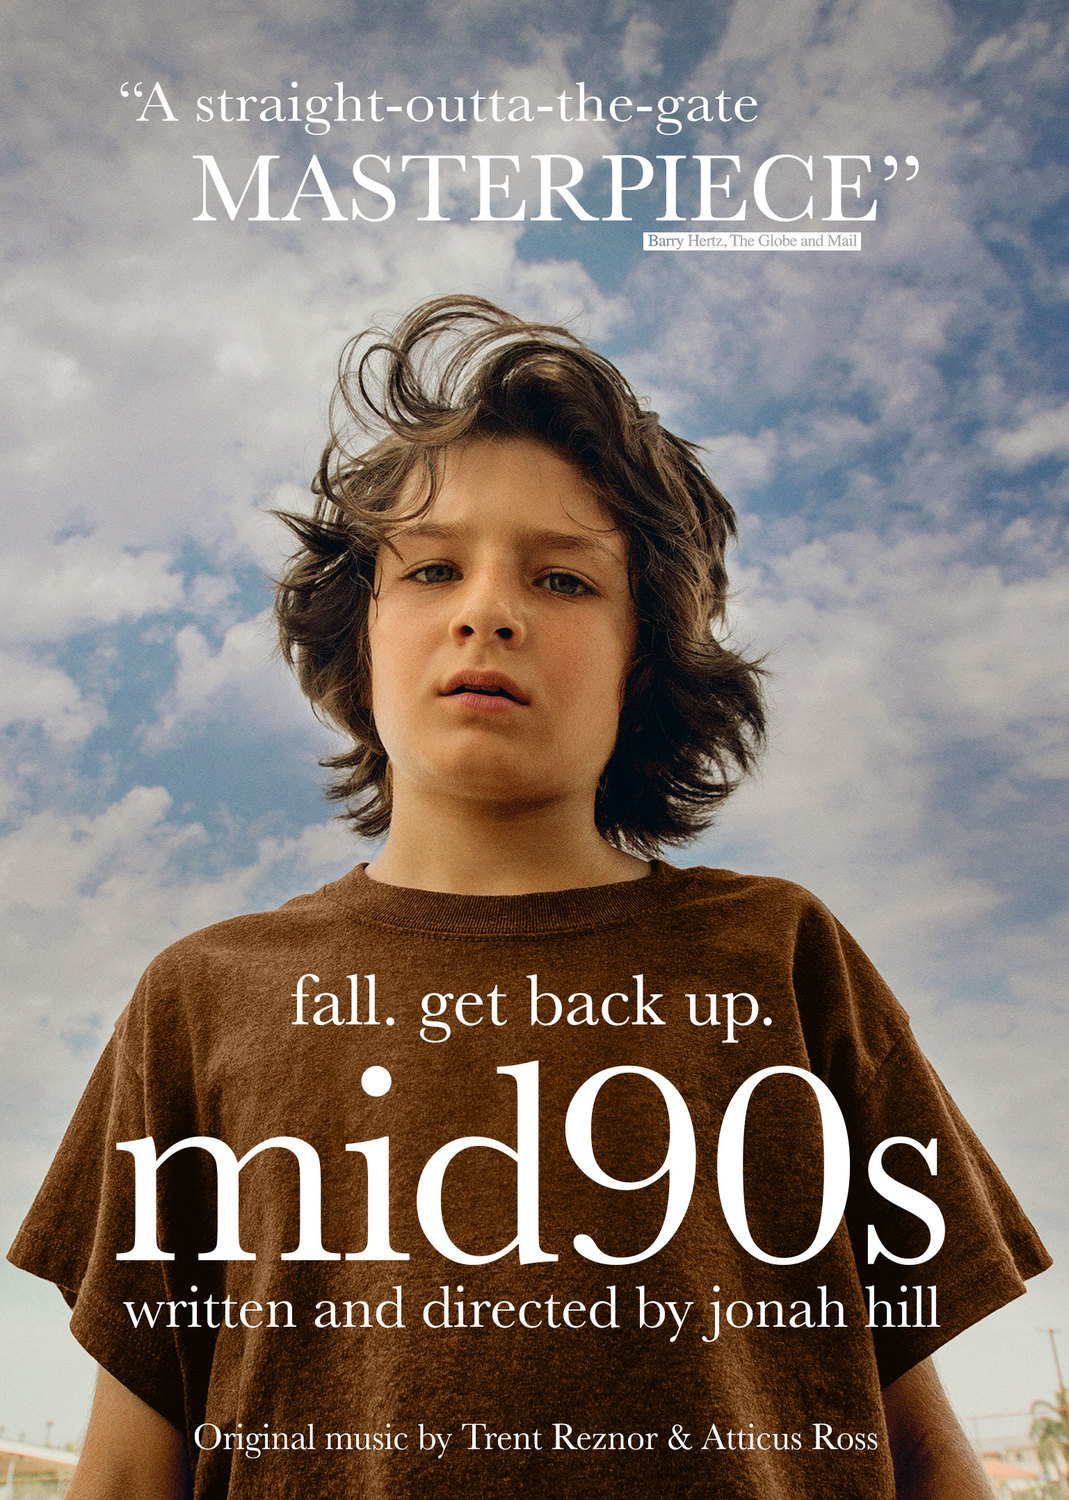 Mid90s [DVD] (2018).  Directed by Jonah Hill.